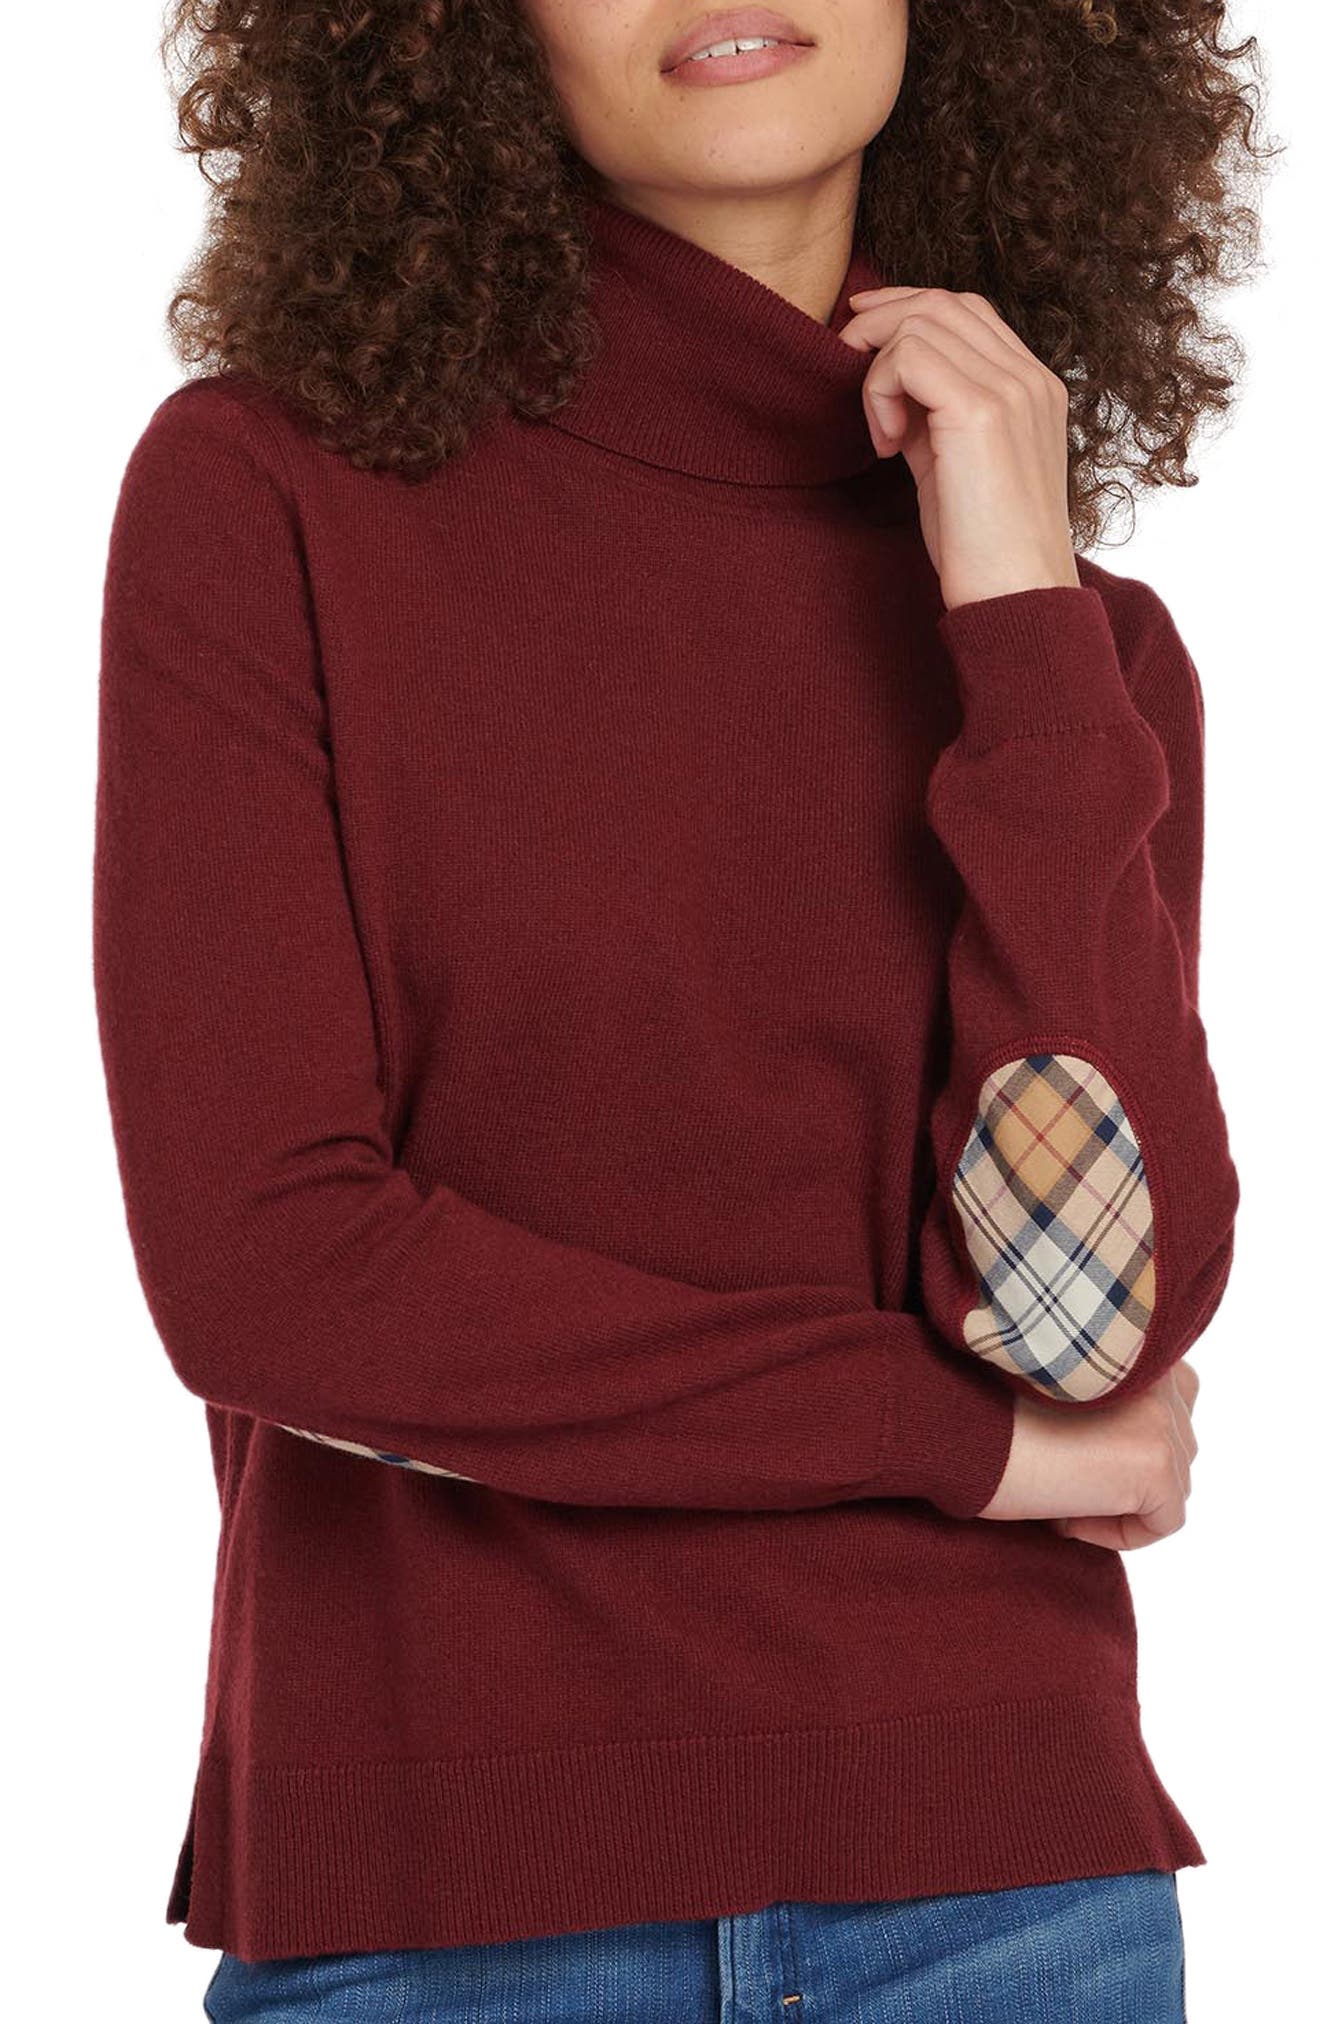 Barbour Pendle Elbow Patch Wool & Cotton Turtleneck Sweater in Burgundy/Hessian Tartan at Nordstrom